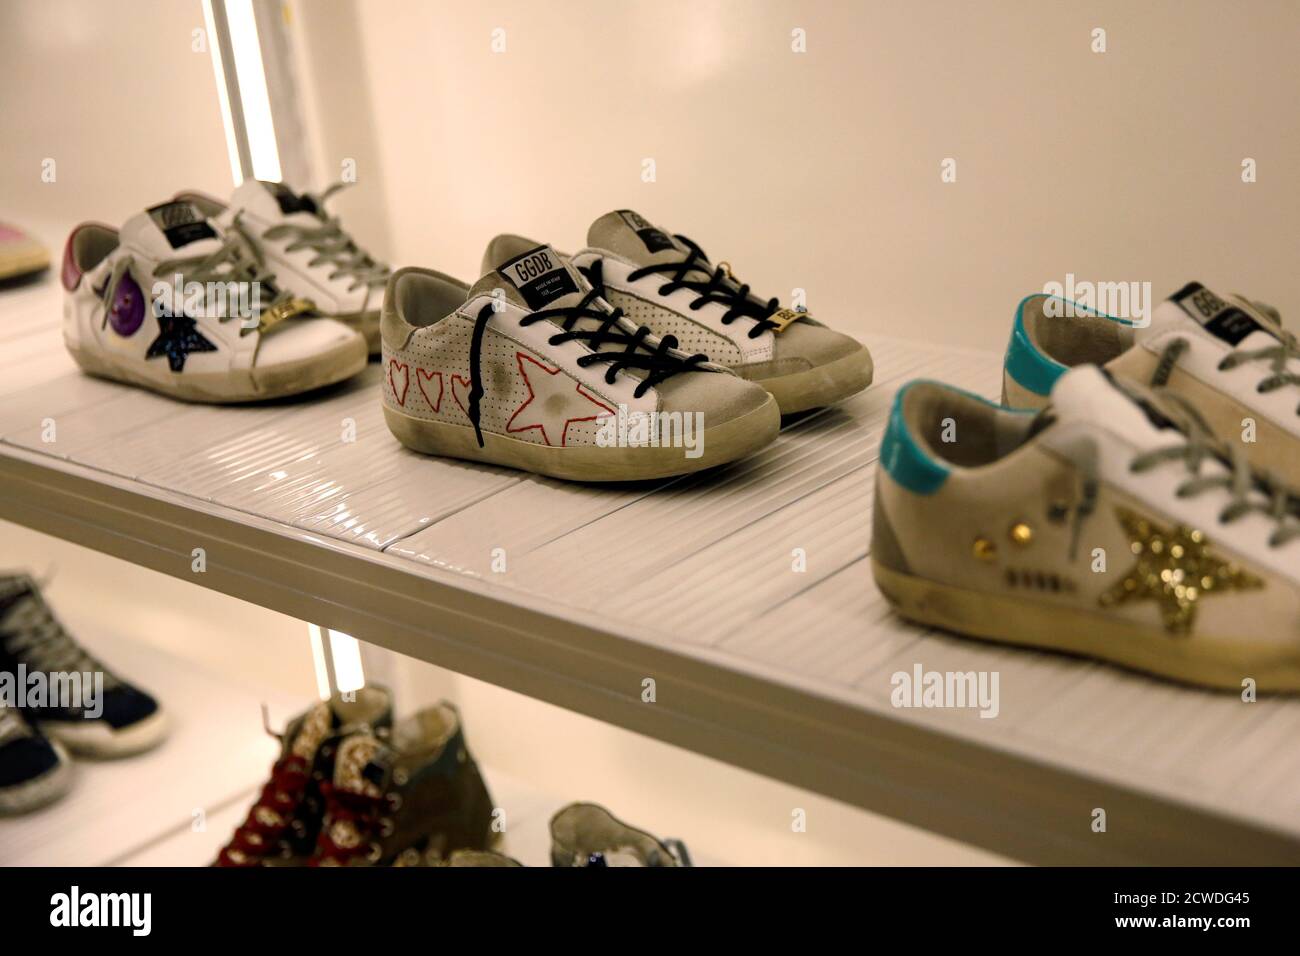 Sneakers of Italian high fashion sneaker brand Golden Goose are displayed at its store in Beijing, China September 23, 2020. Picture taken September 23, 2020. Wang Stock Photo - Alamy